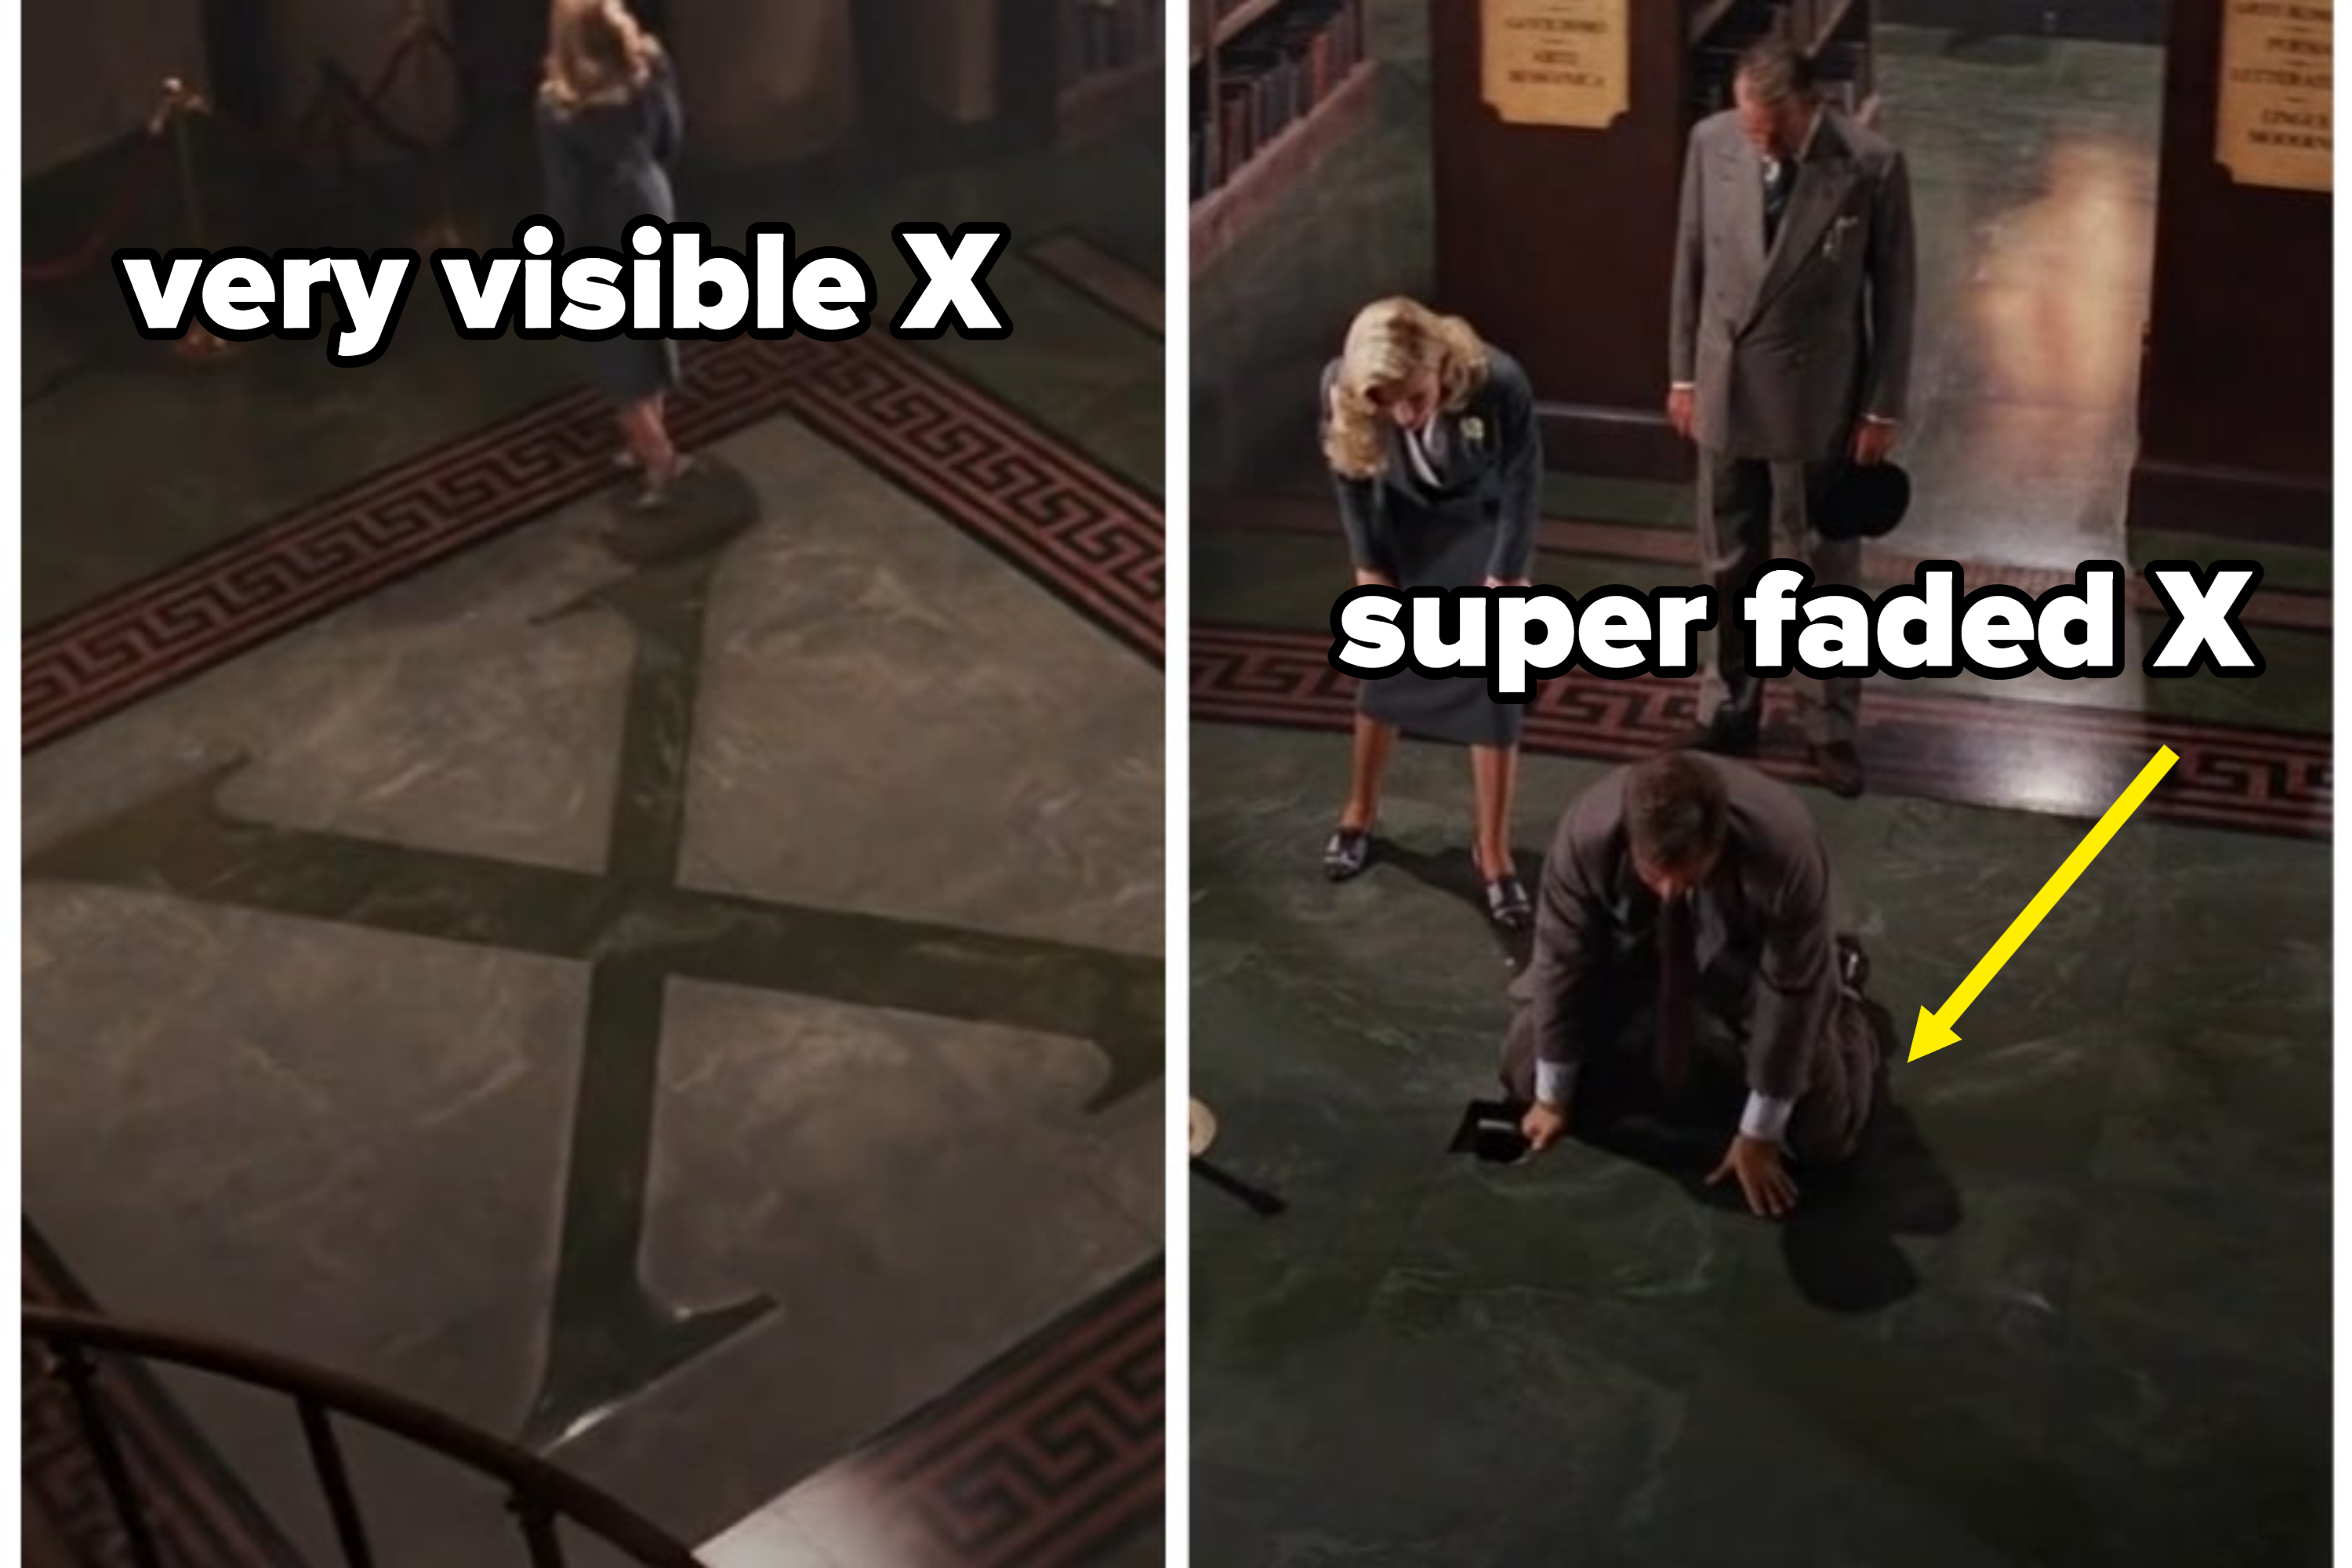 Screen grabs of the X disappearing during the scene